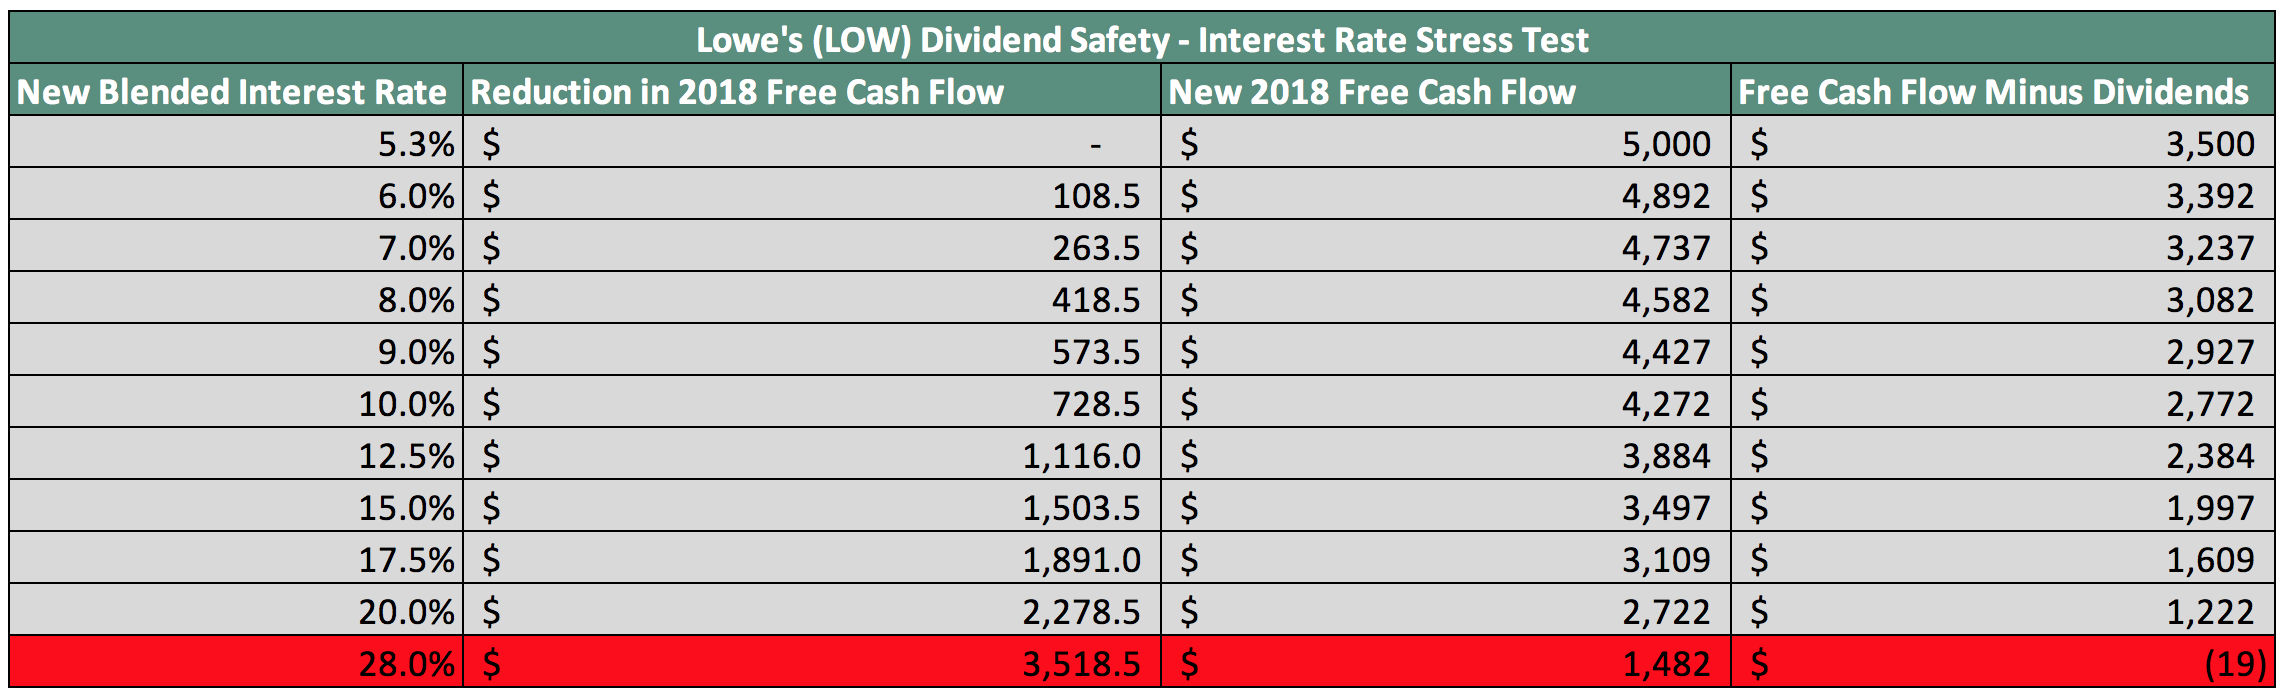 How Safe Is Lowe's Dividend? (NYSELOW) Seeking Alpha